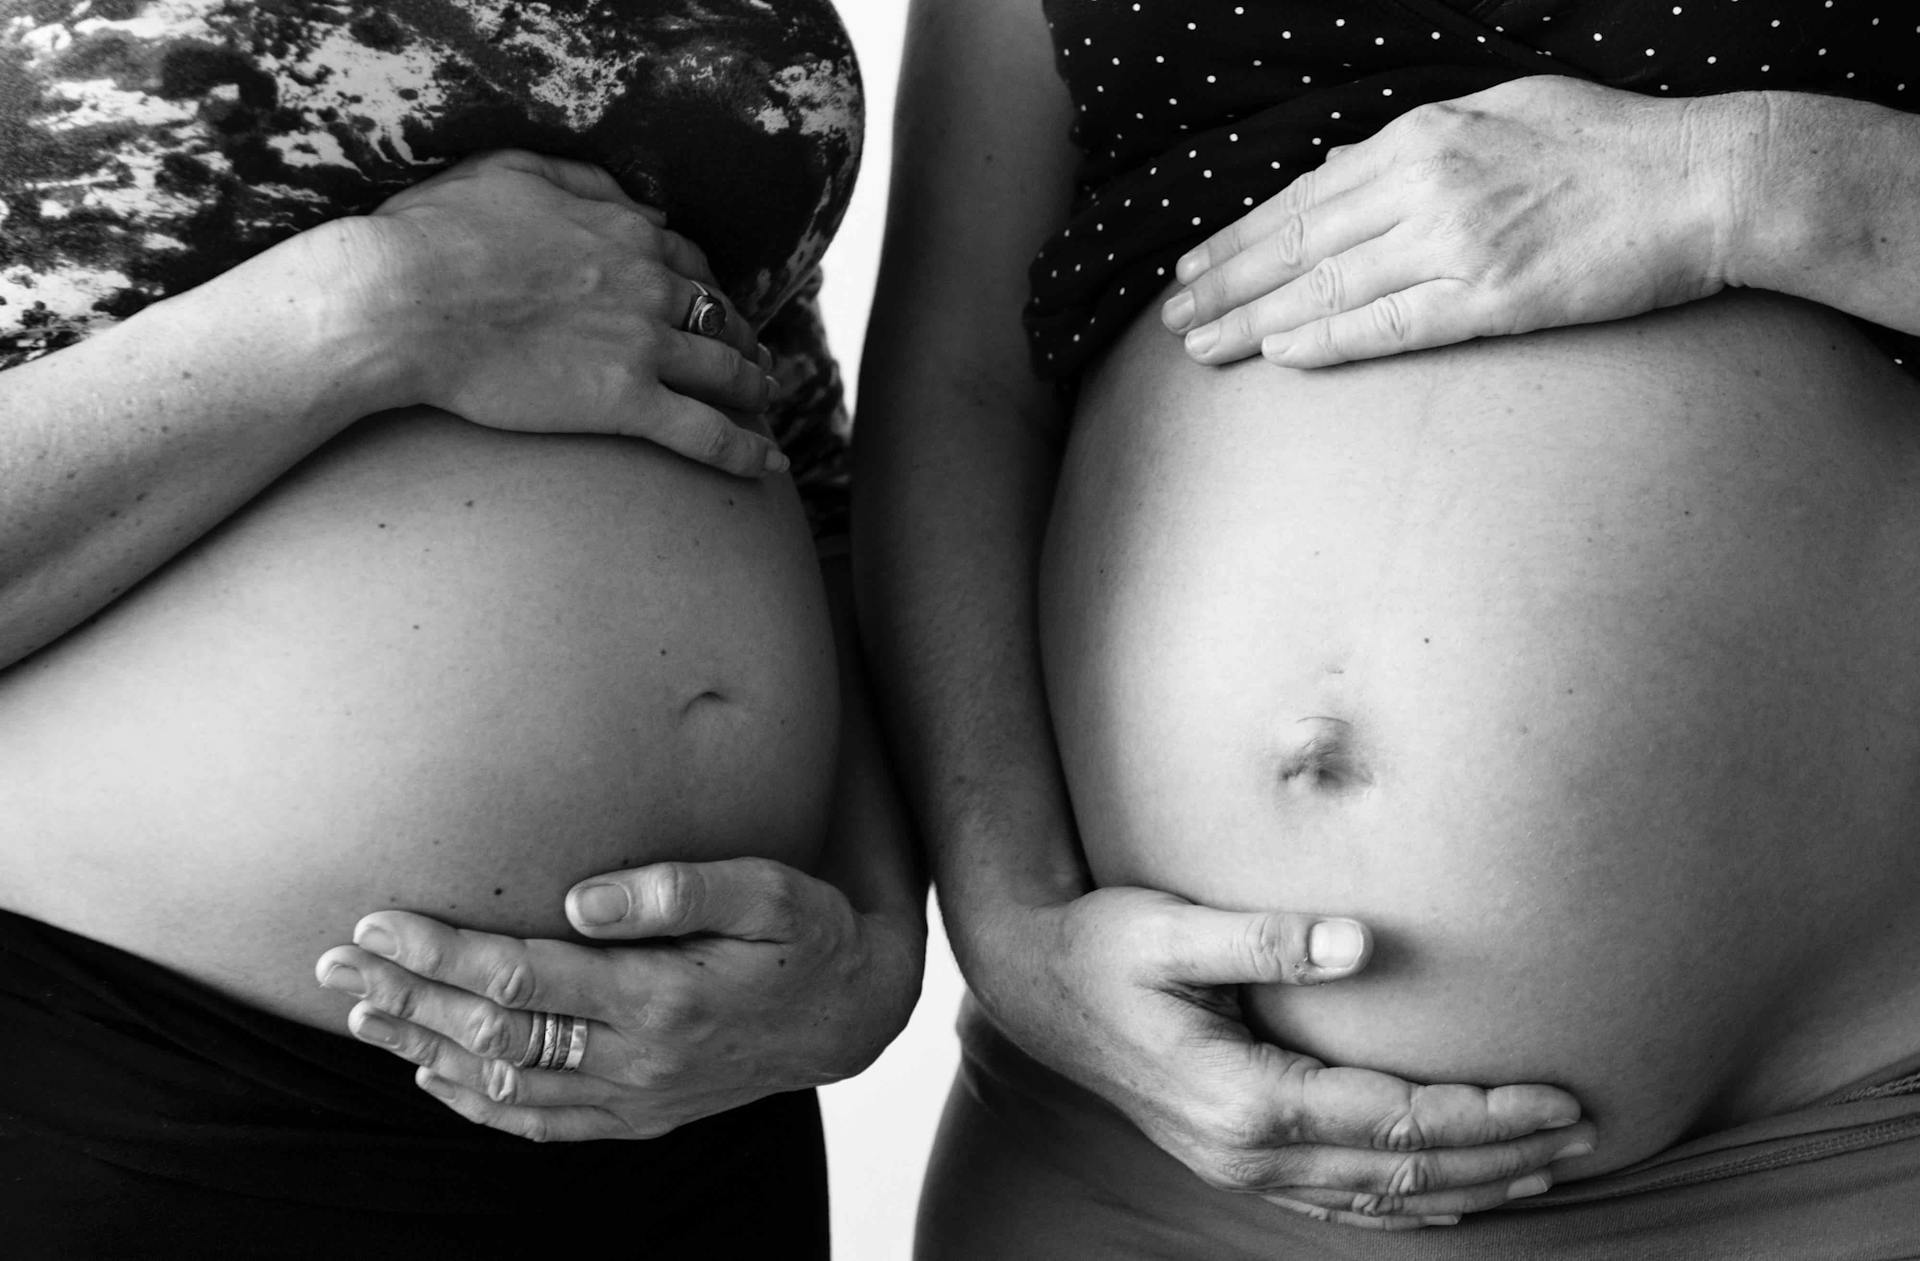 Calls For Official Guidance On Healthy Weight Gain For Pregnant Women Could Cause Unnecessary Stress and Anxiety